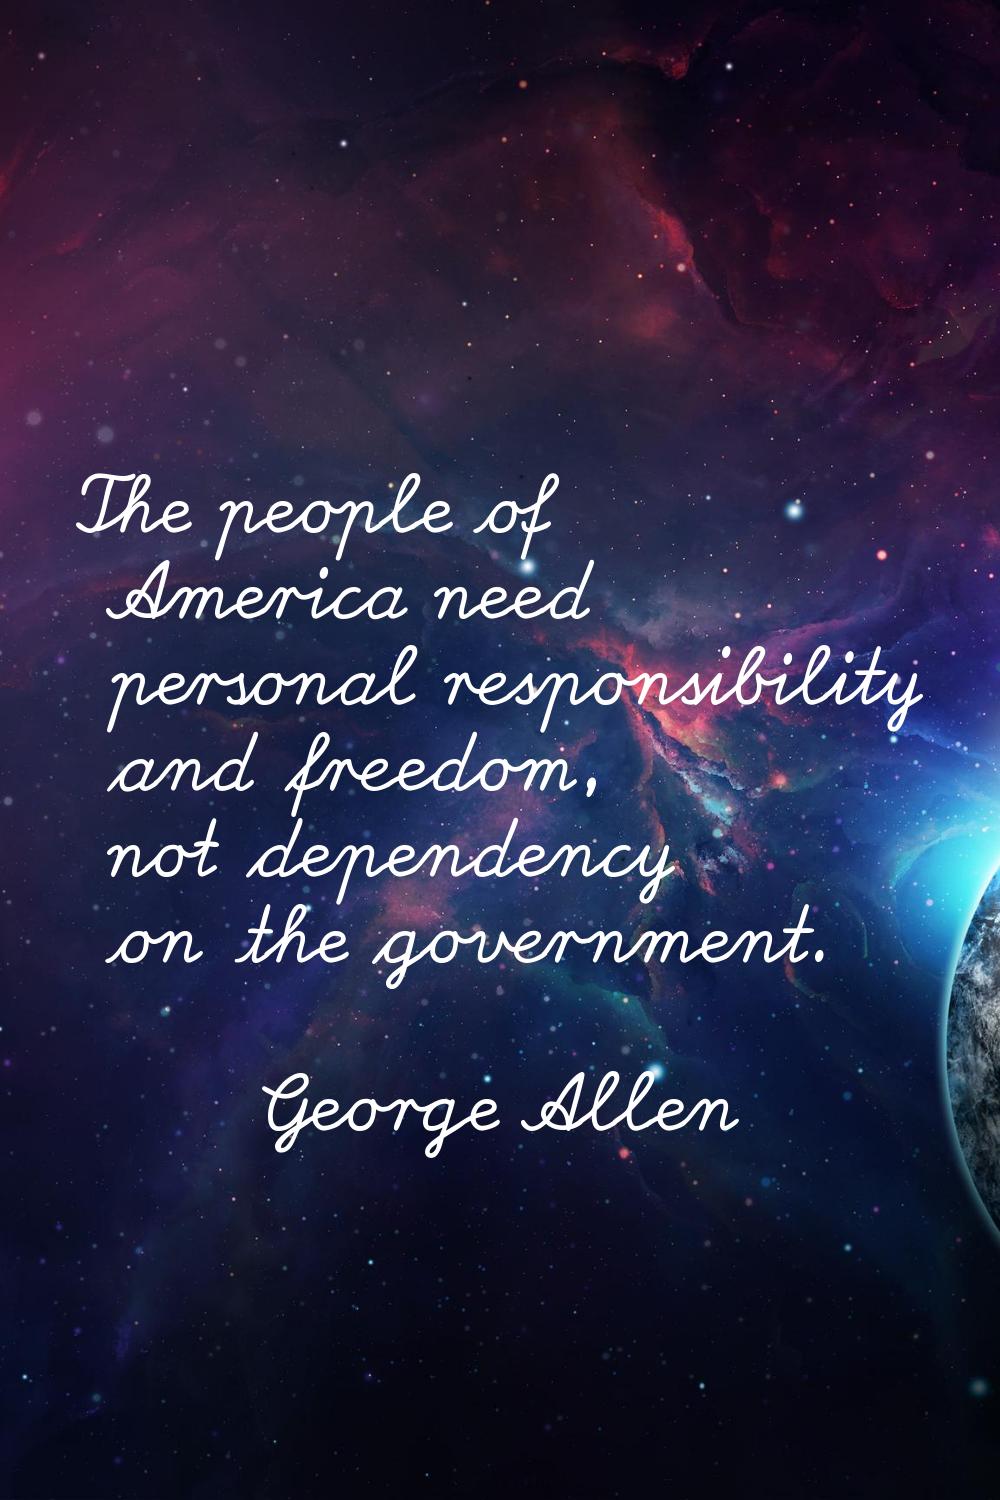 The people of America need personal responsibility and freedom, not dependency on the government.